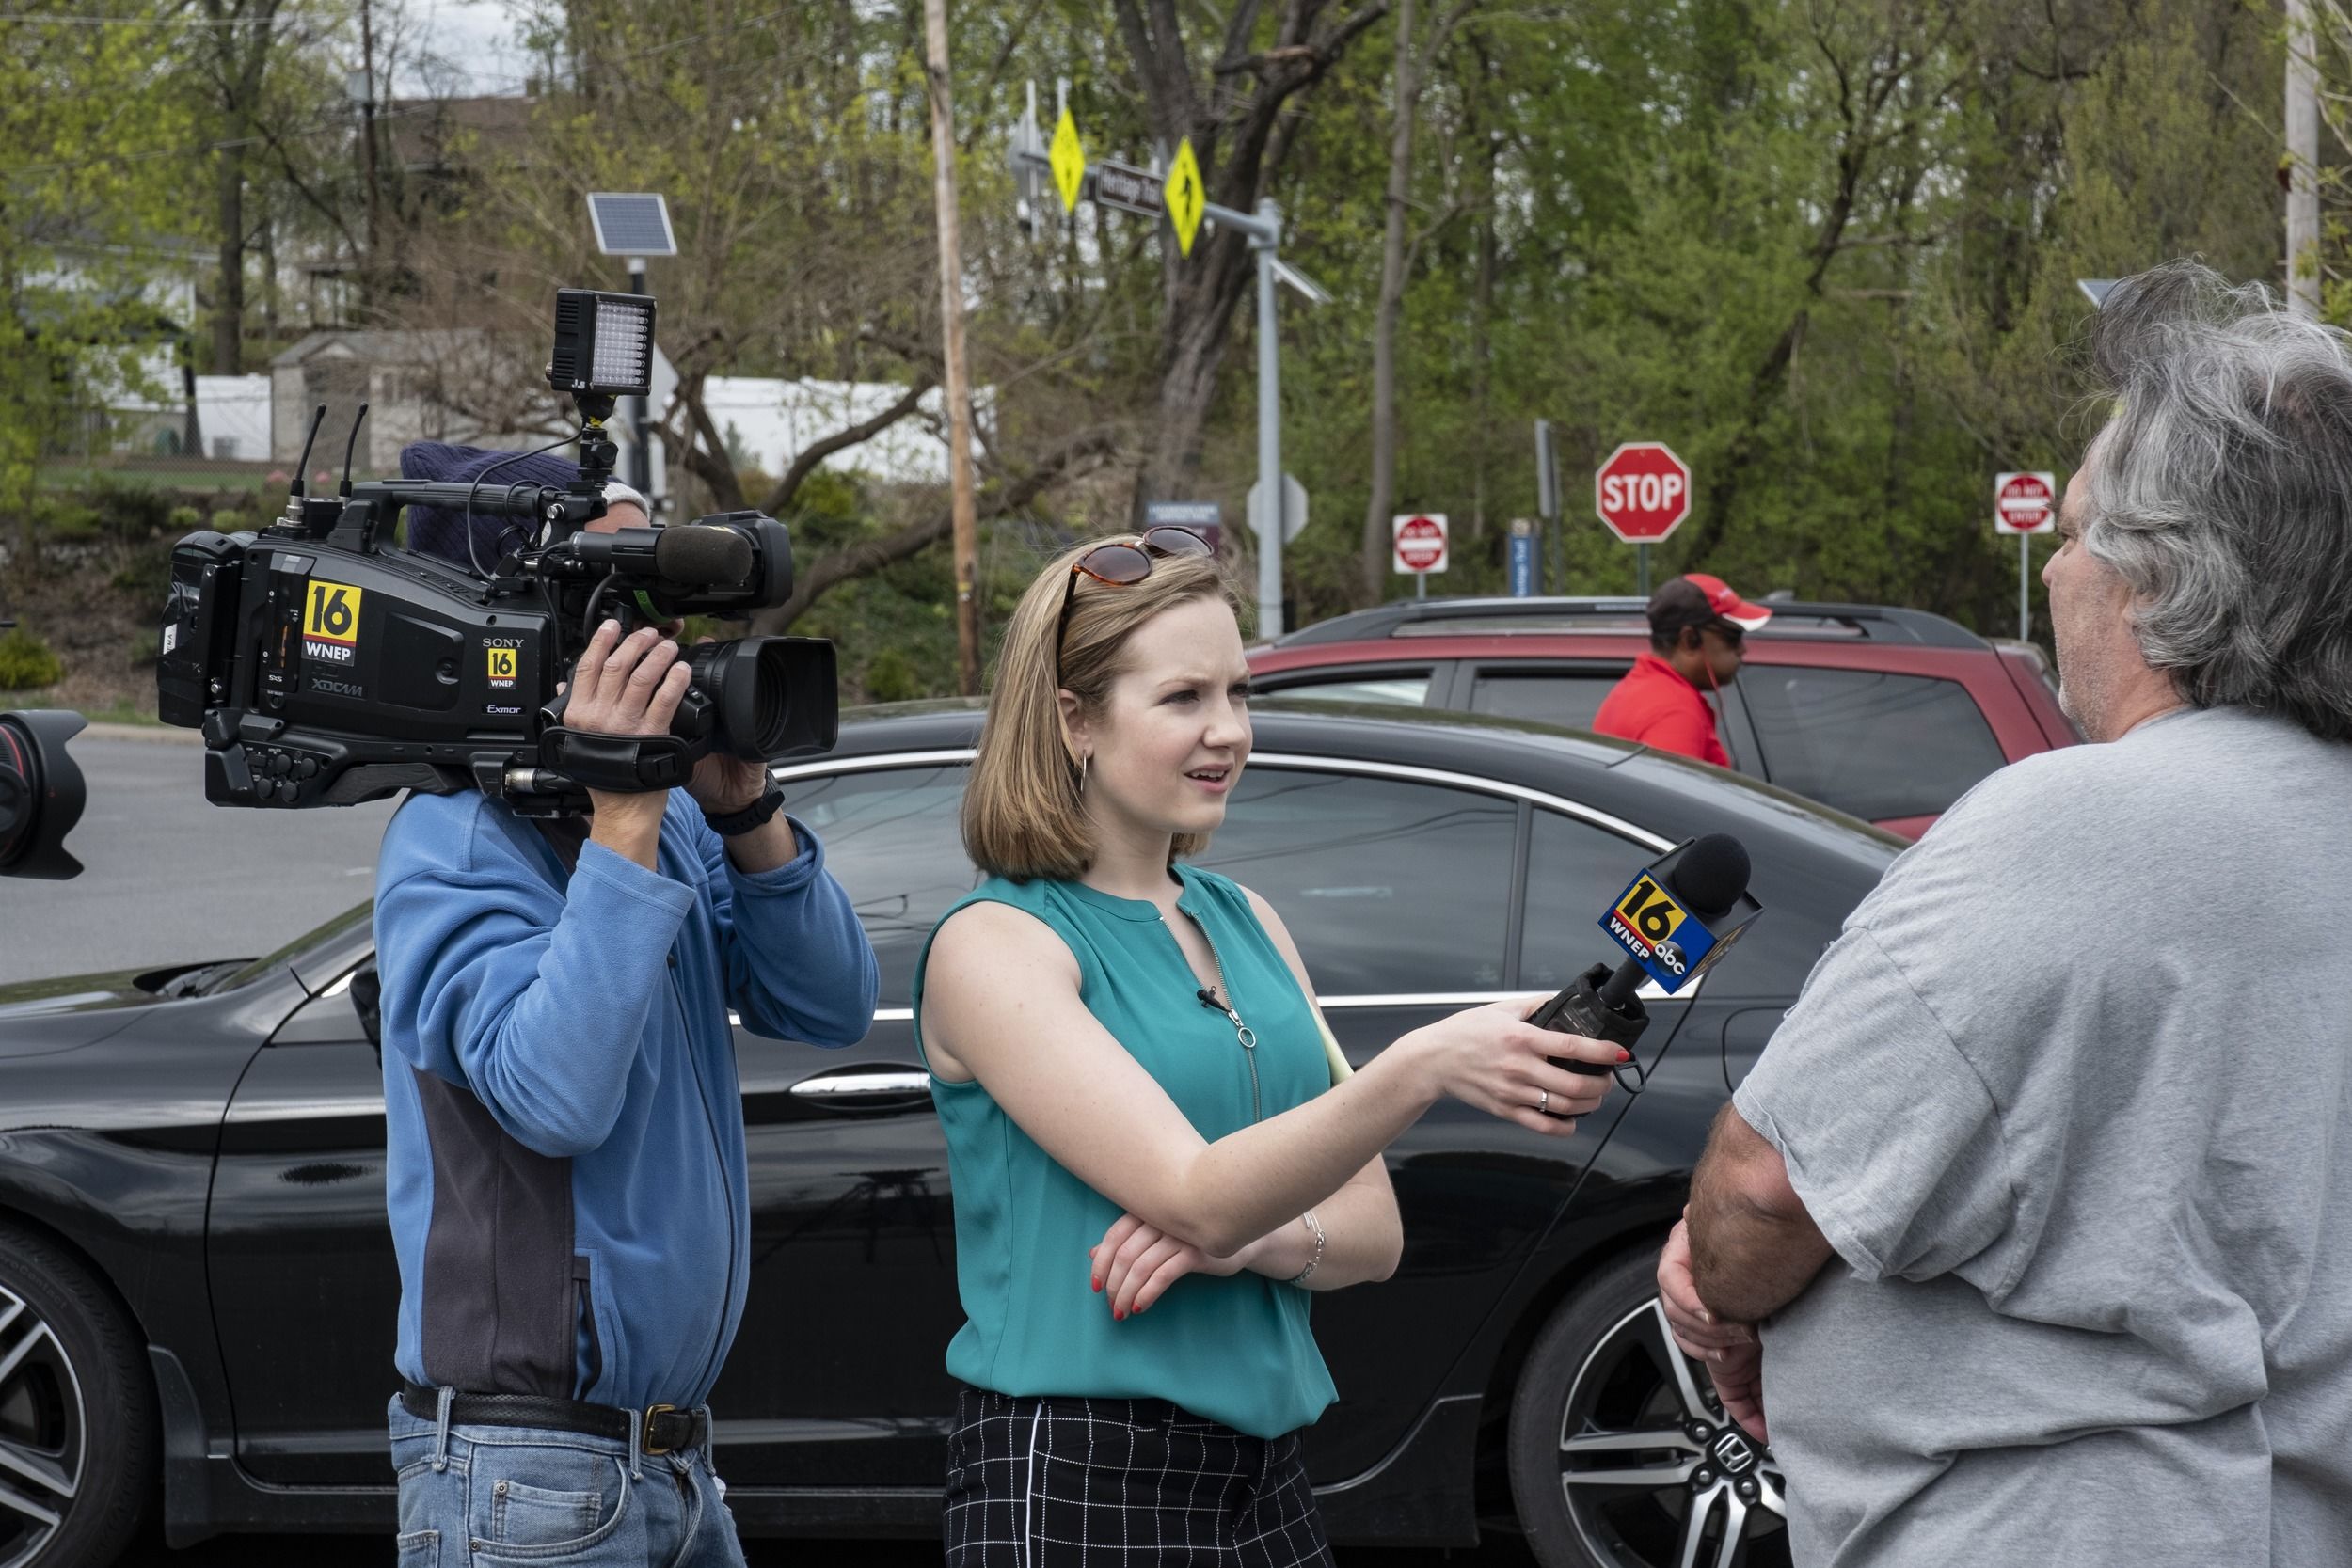 A student reporter holds a microphone while interviewing a person on the street.